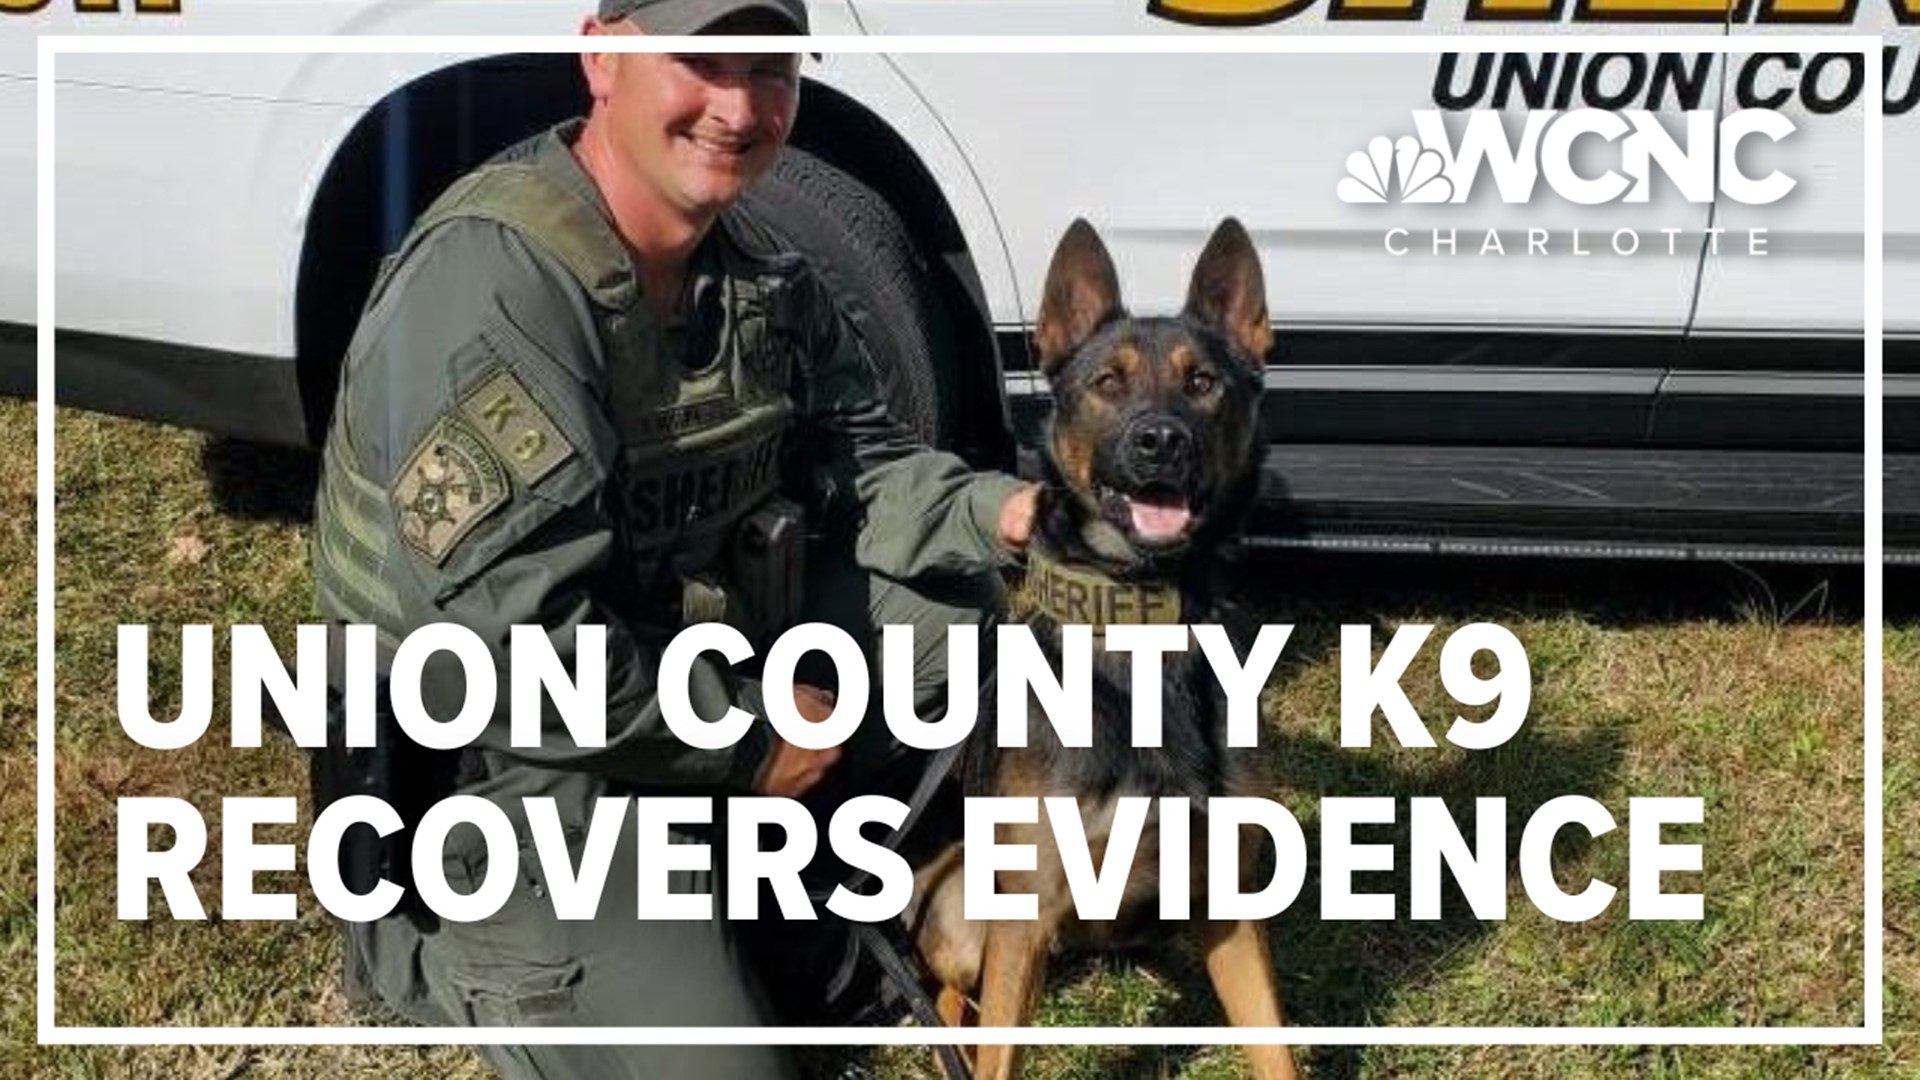 "We are extremely proud of all our K9 teams and the countless hours of training they put in to ensure they are prepared when the call to action comes."